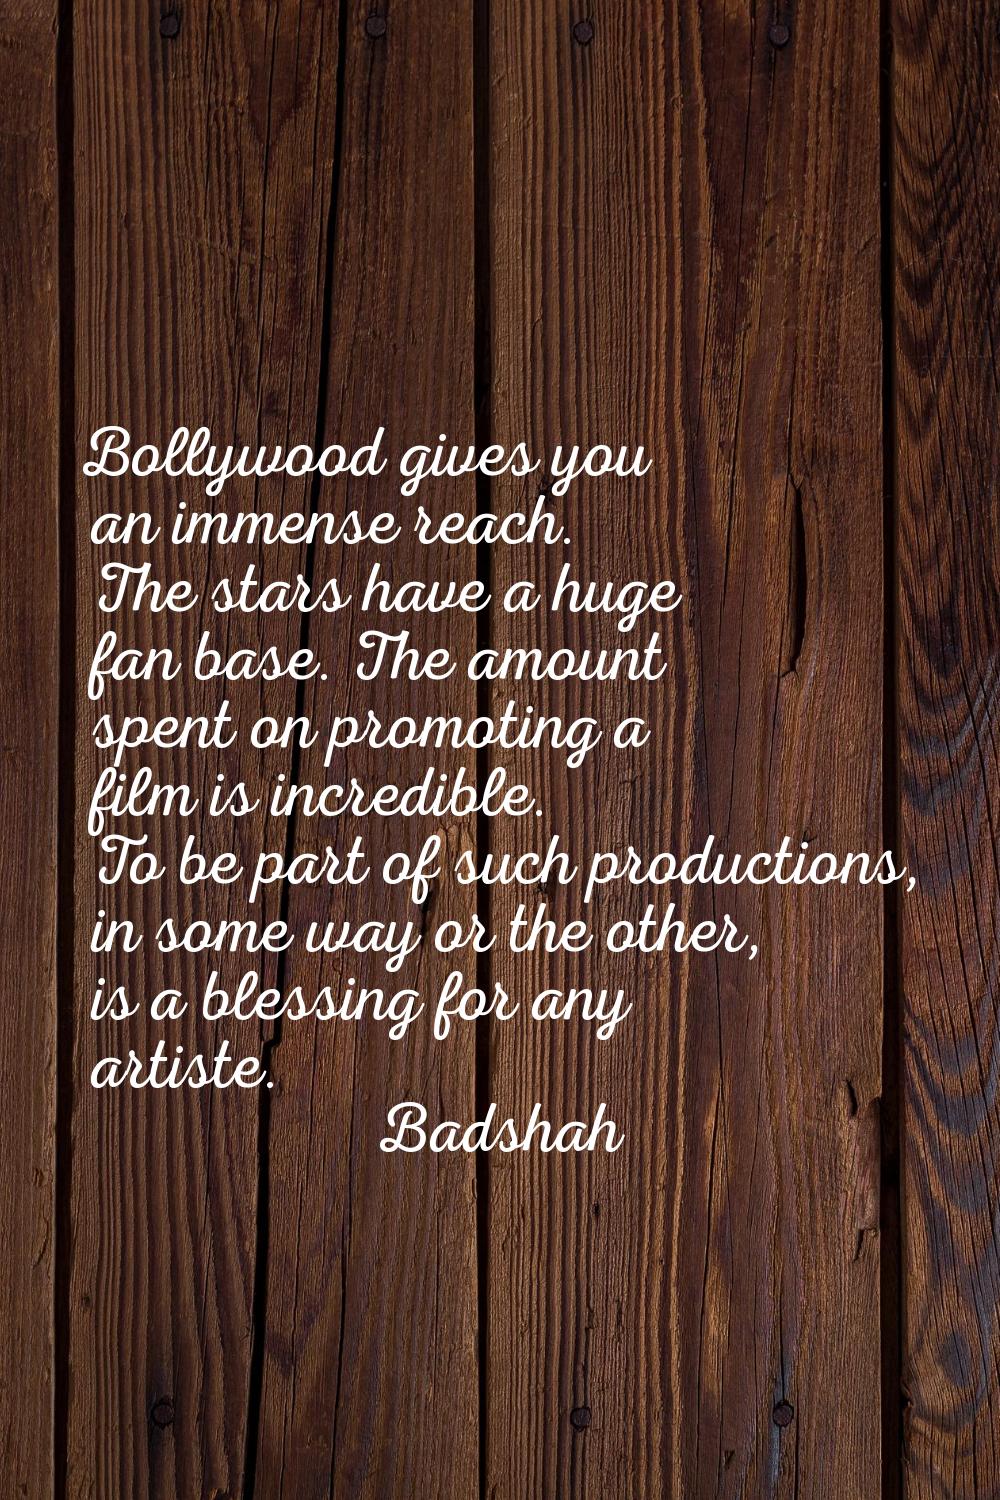 Bollywood gives you an immense reach. The stars have a huge fan base. The amount spent on promoting